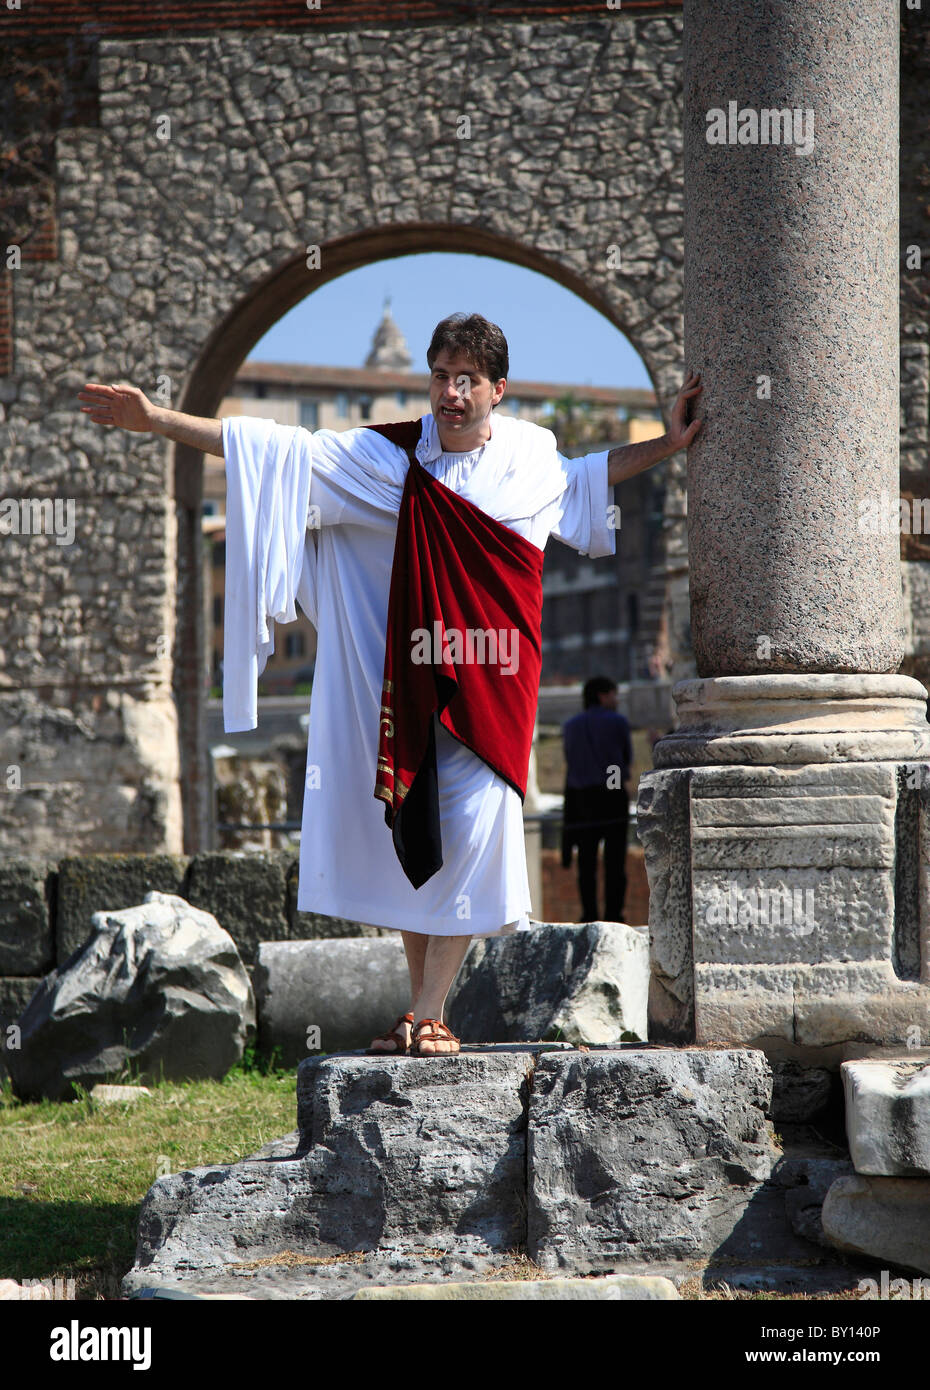 Actor in role of Roman senator acts part in the Roman Forum, Rome Stock Photo